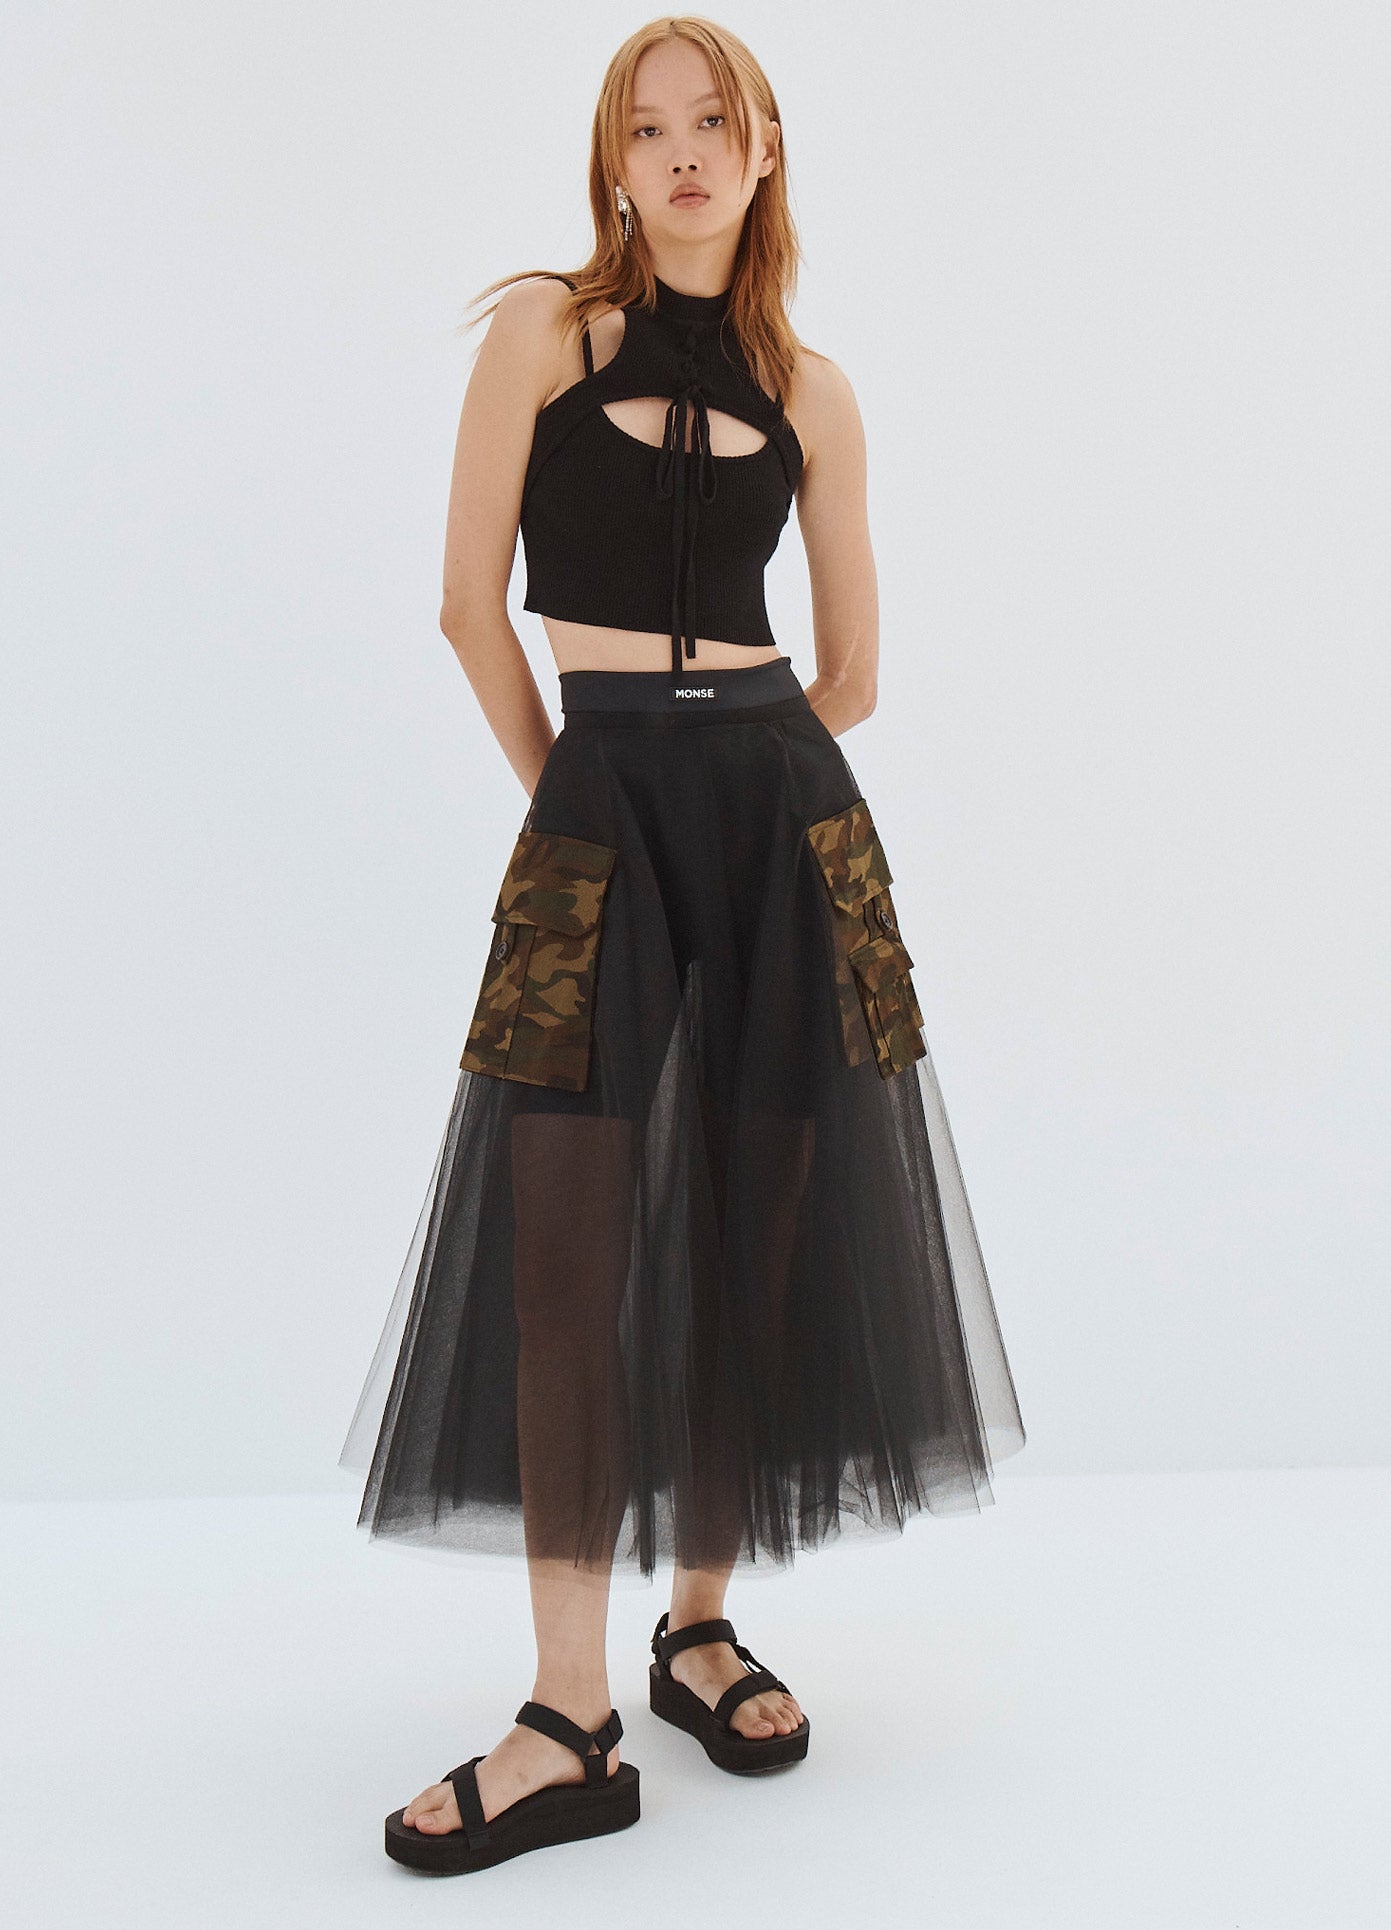 MONSE Tulle Circle Skirt with Cargo Pockets in Black and Camo on Model Full Front Alternate View